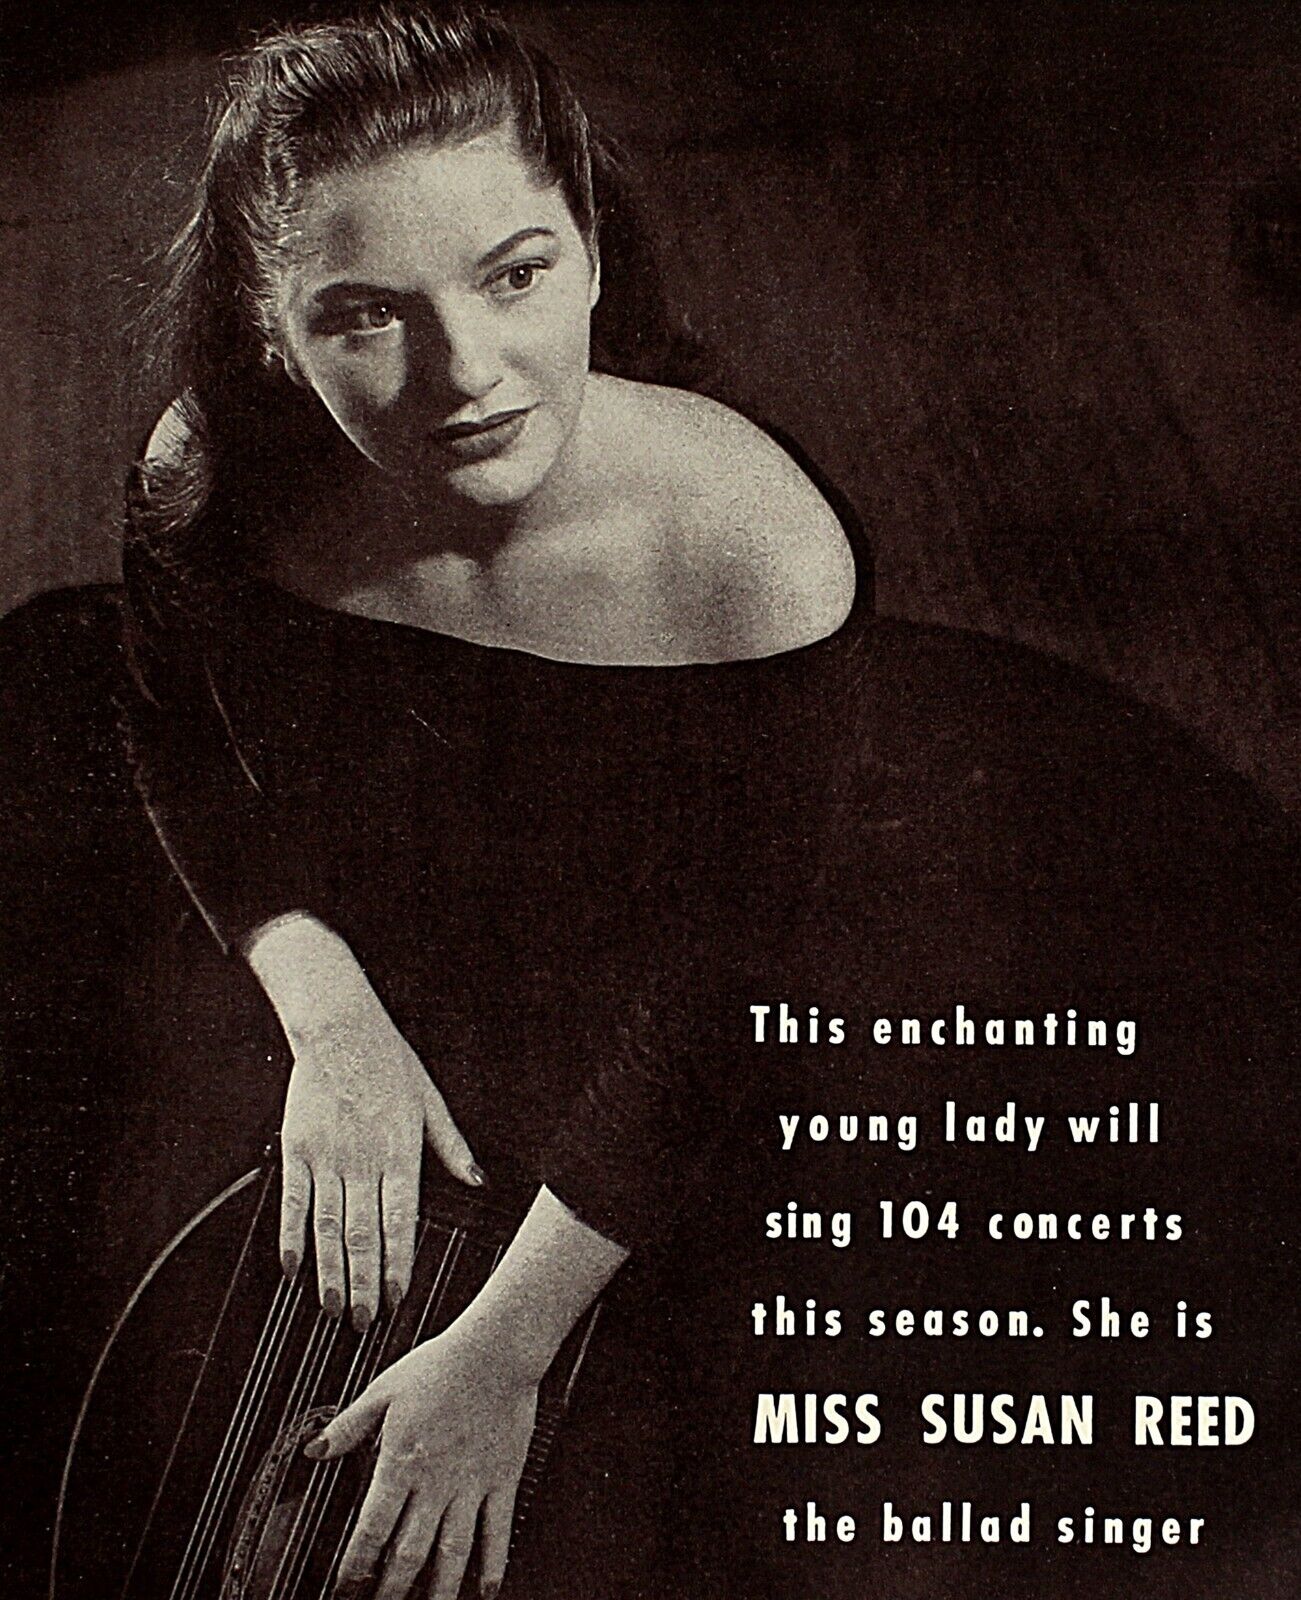 Vintage Music Print Ad MISS SUSAN REED 1949 Booking Ads 13 x 9 3/4